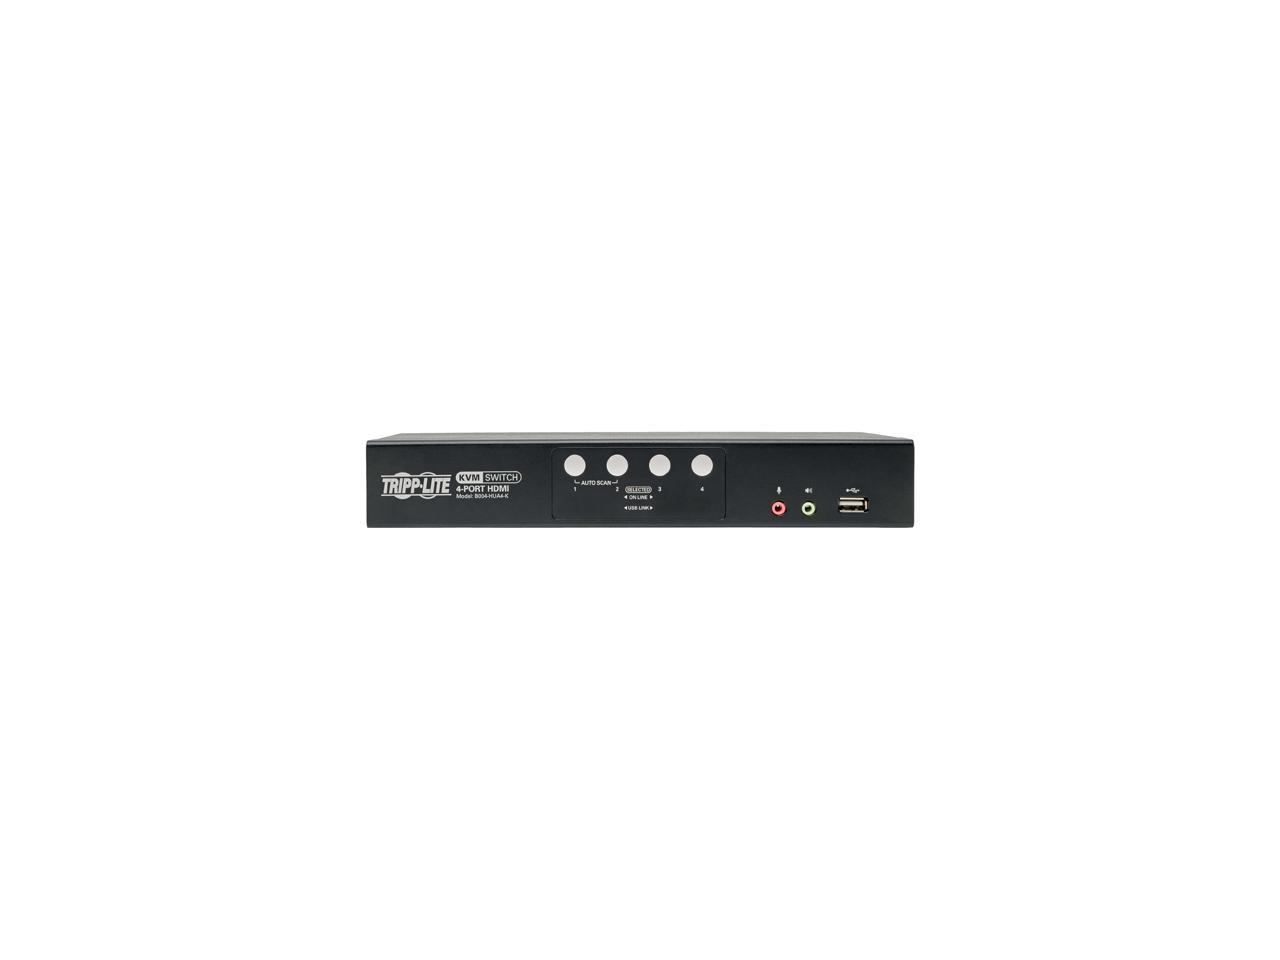 Tripp Lite 4-Port HDMI/USB KVM Switch with Audio/Video and USB Peripheral Sharing